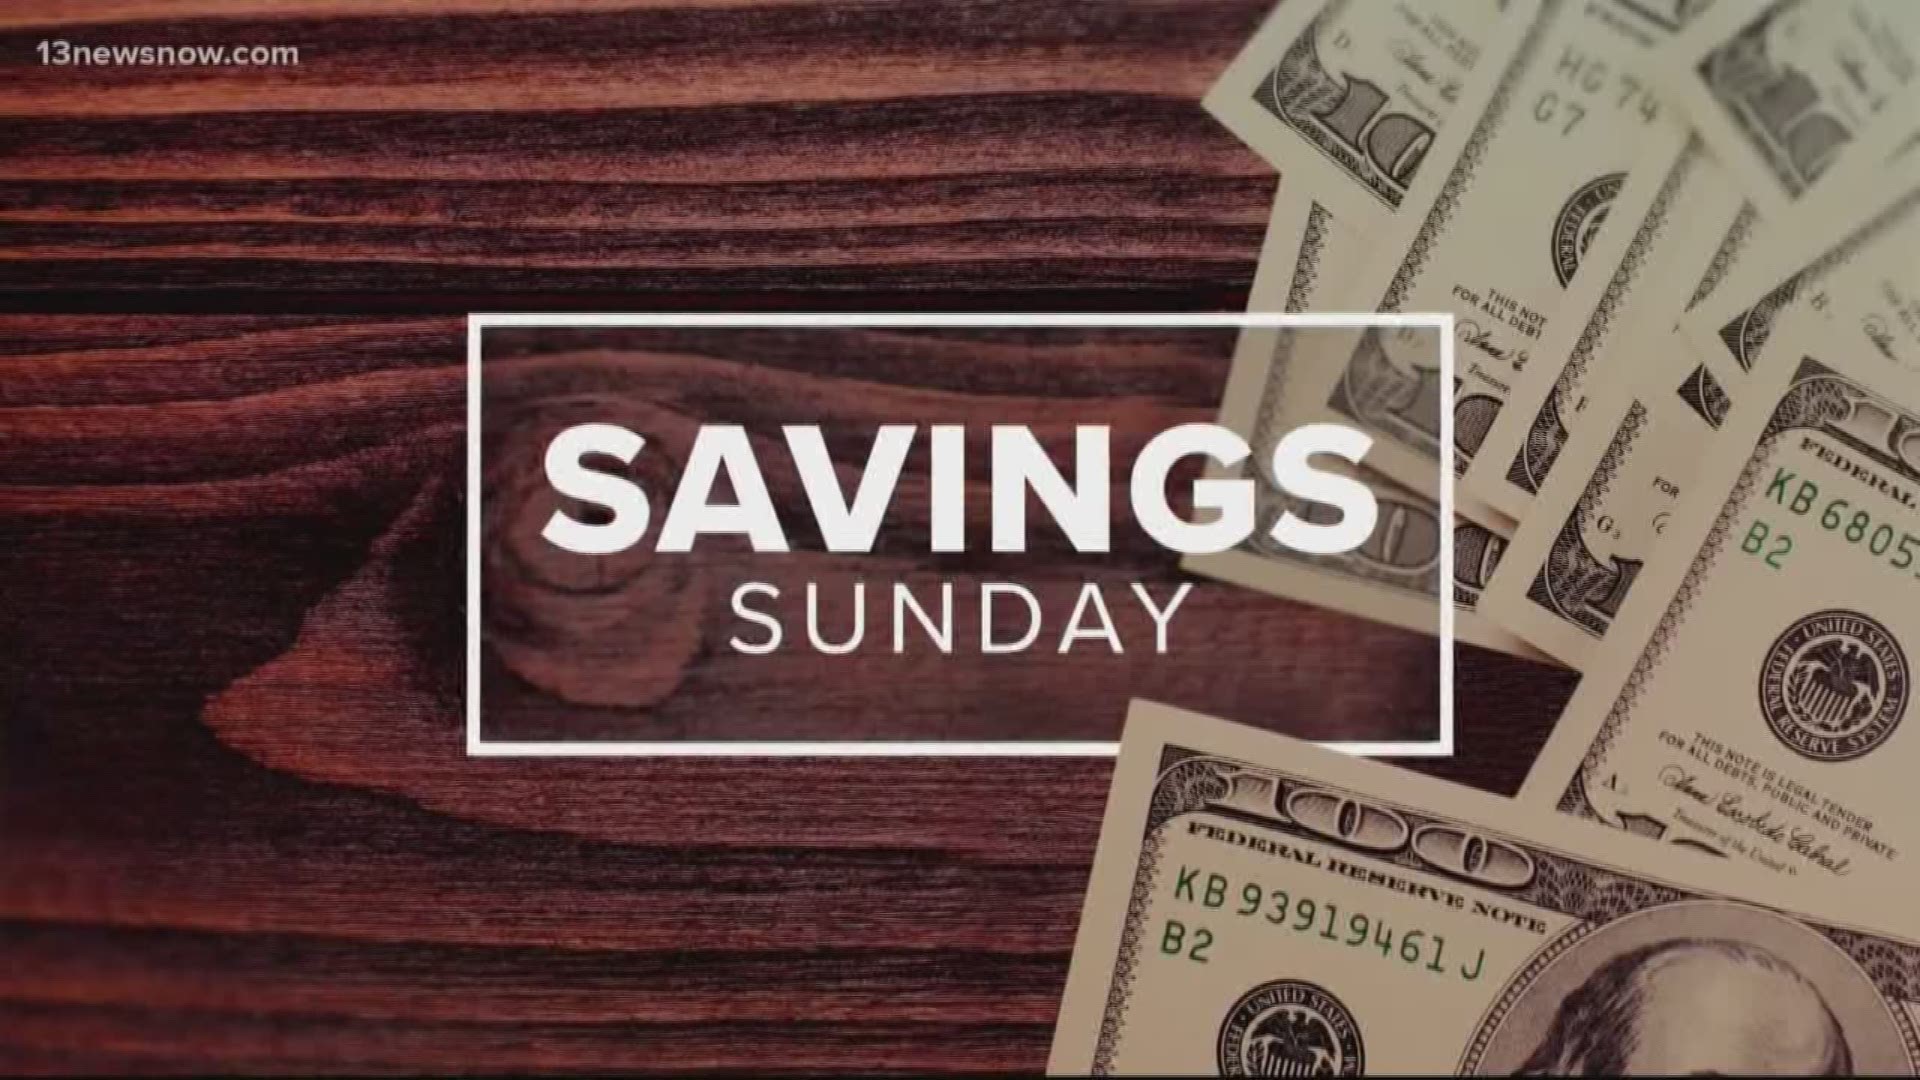 Laura Oliver from www.afrugalchick.com has your big savings for the week of June 30, 2019.